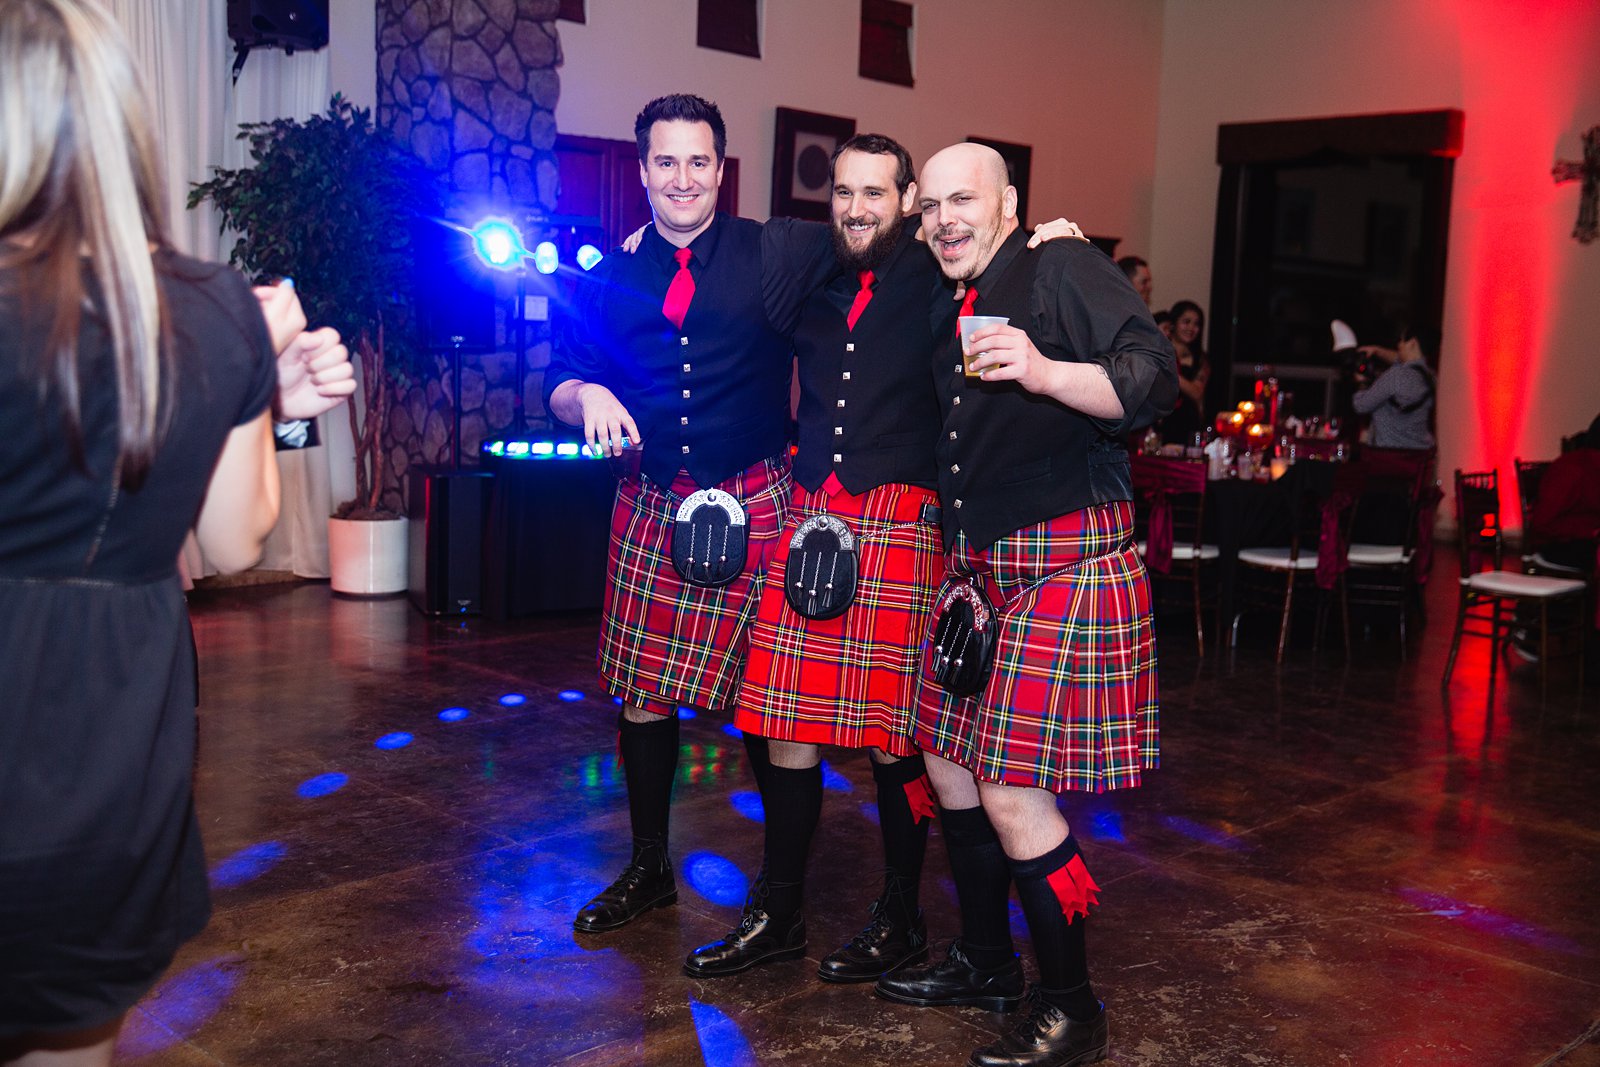 Groomsmen in kilts dance with guests at a wedding reception by PMA Photography.